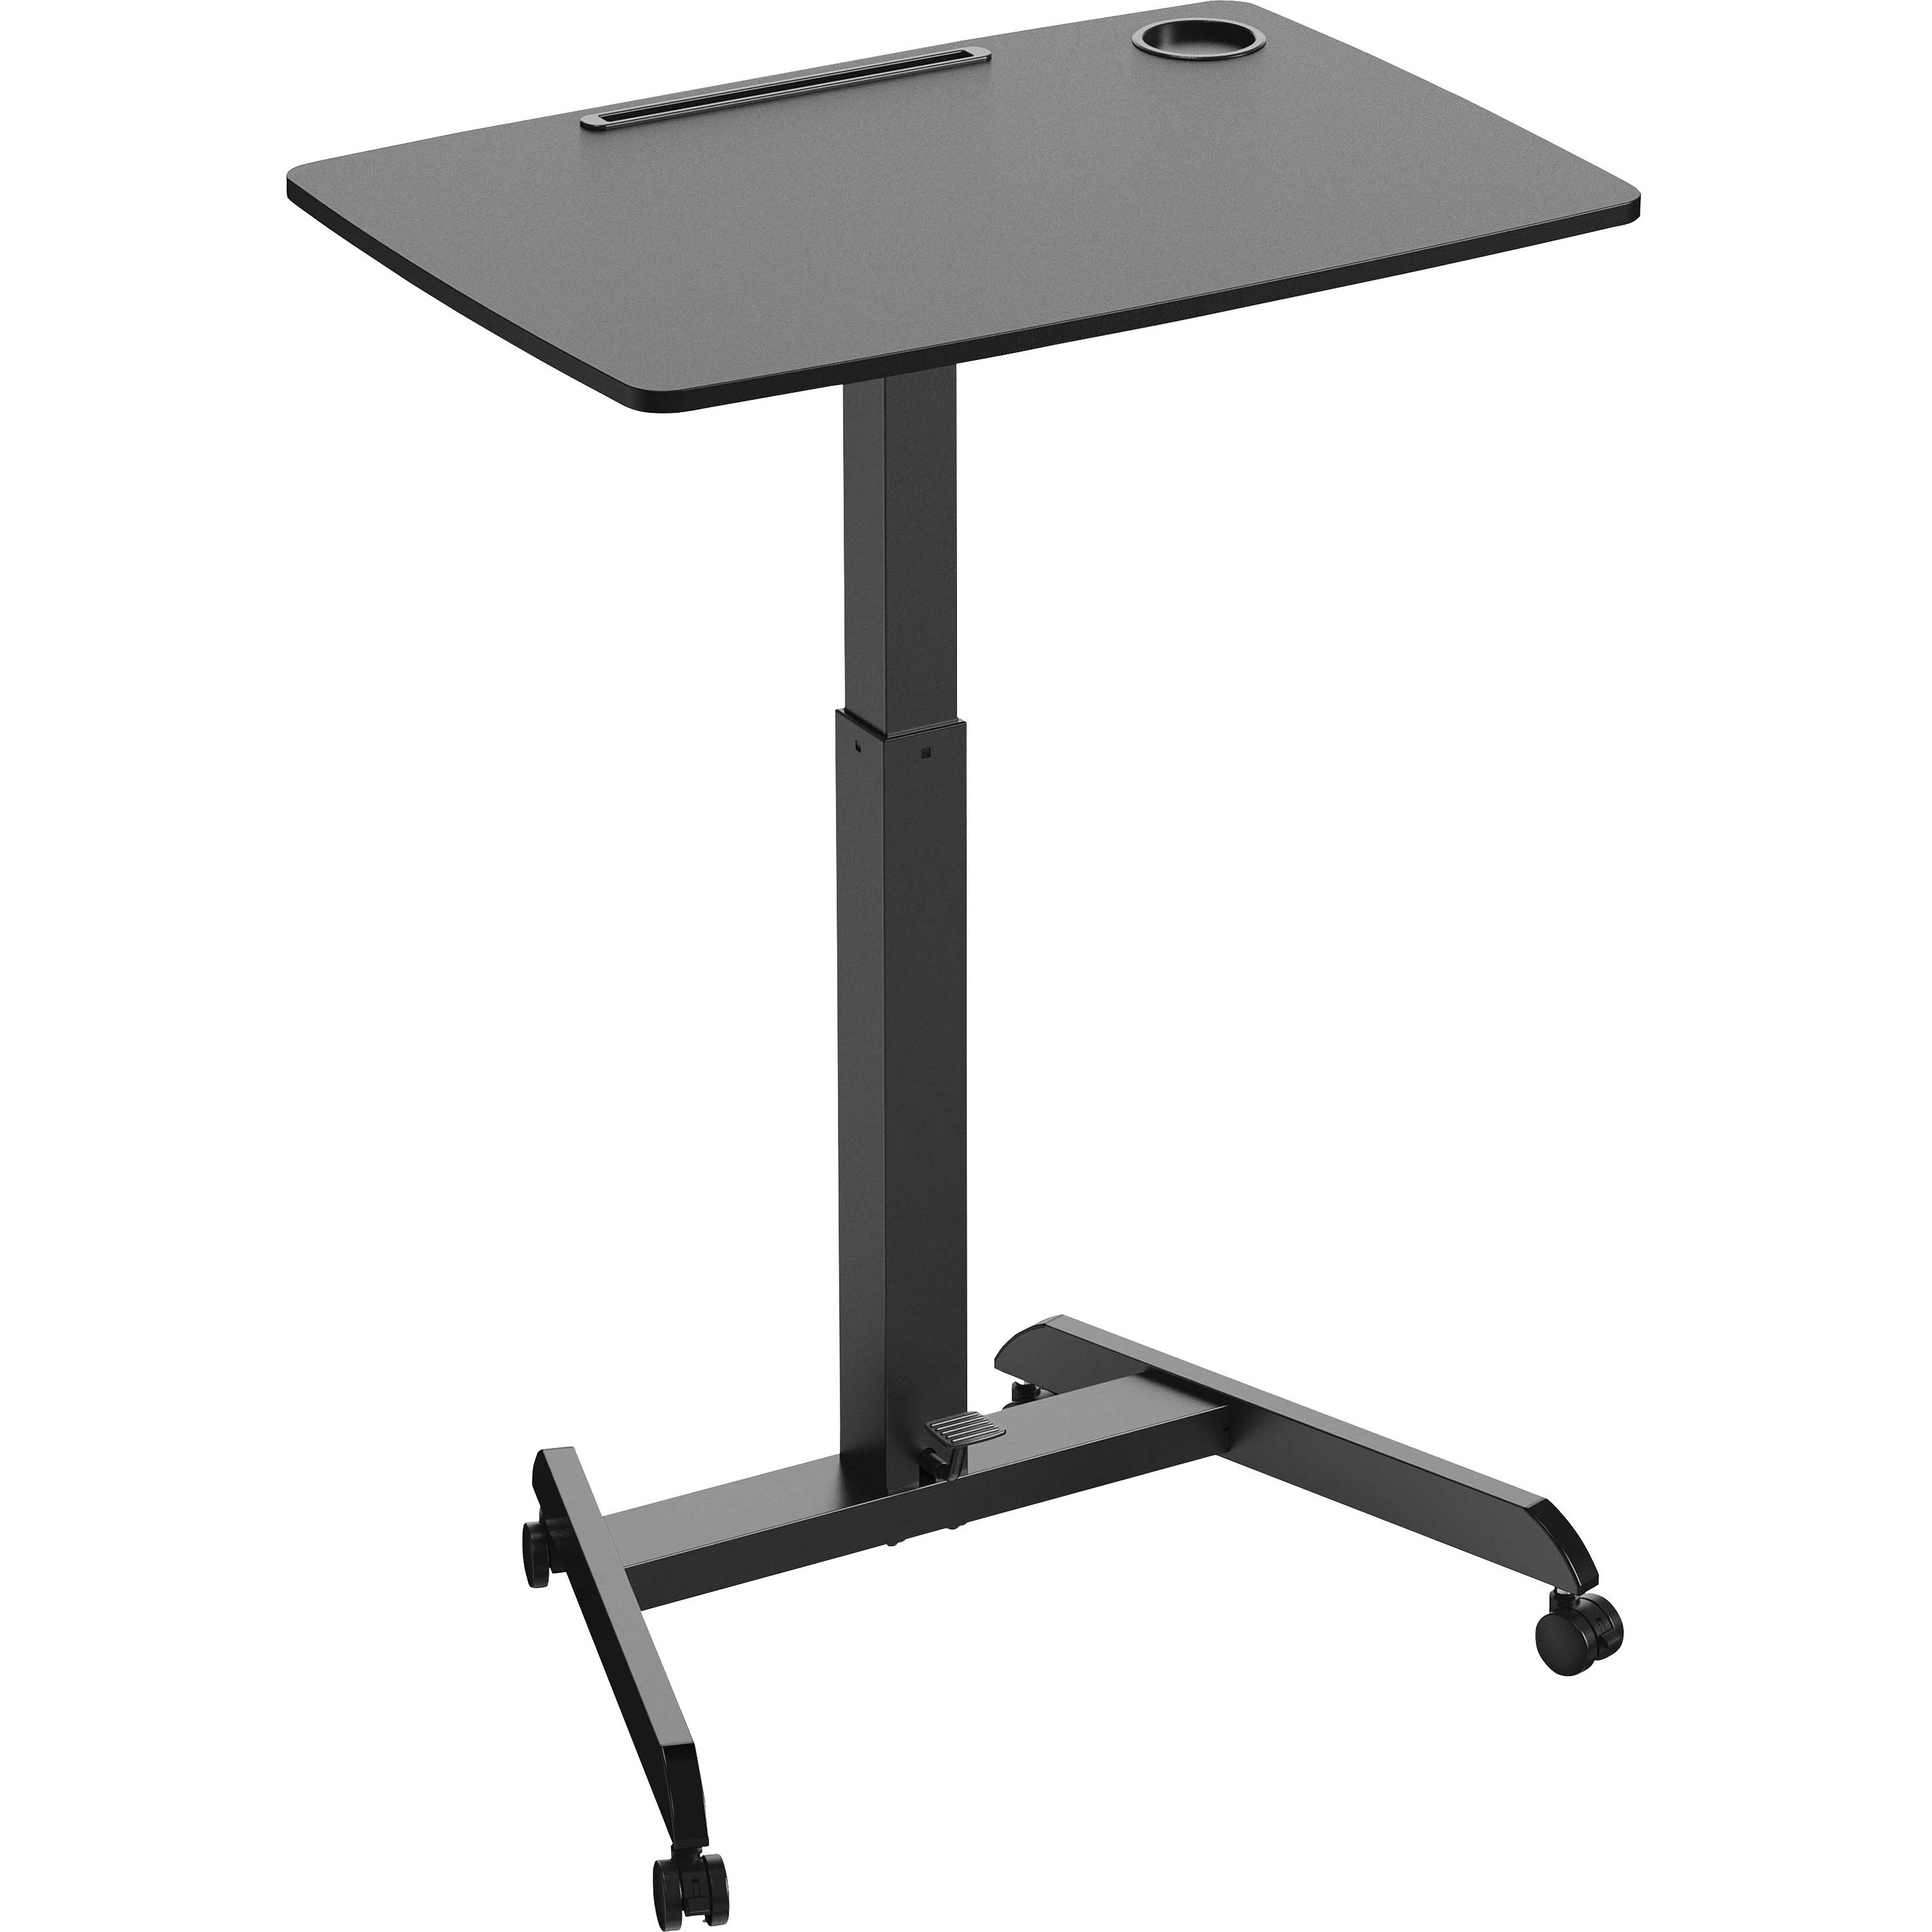 kantek-adjustable-height-mobile-sit-stand-desk-adjustable-height-22-table-top-length-x-3150-table-top-width-49-height-assembly-required-black-melamine-top-material-1-each_ktksts330b - 1